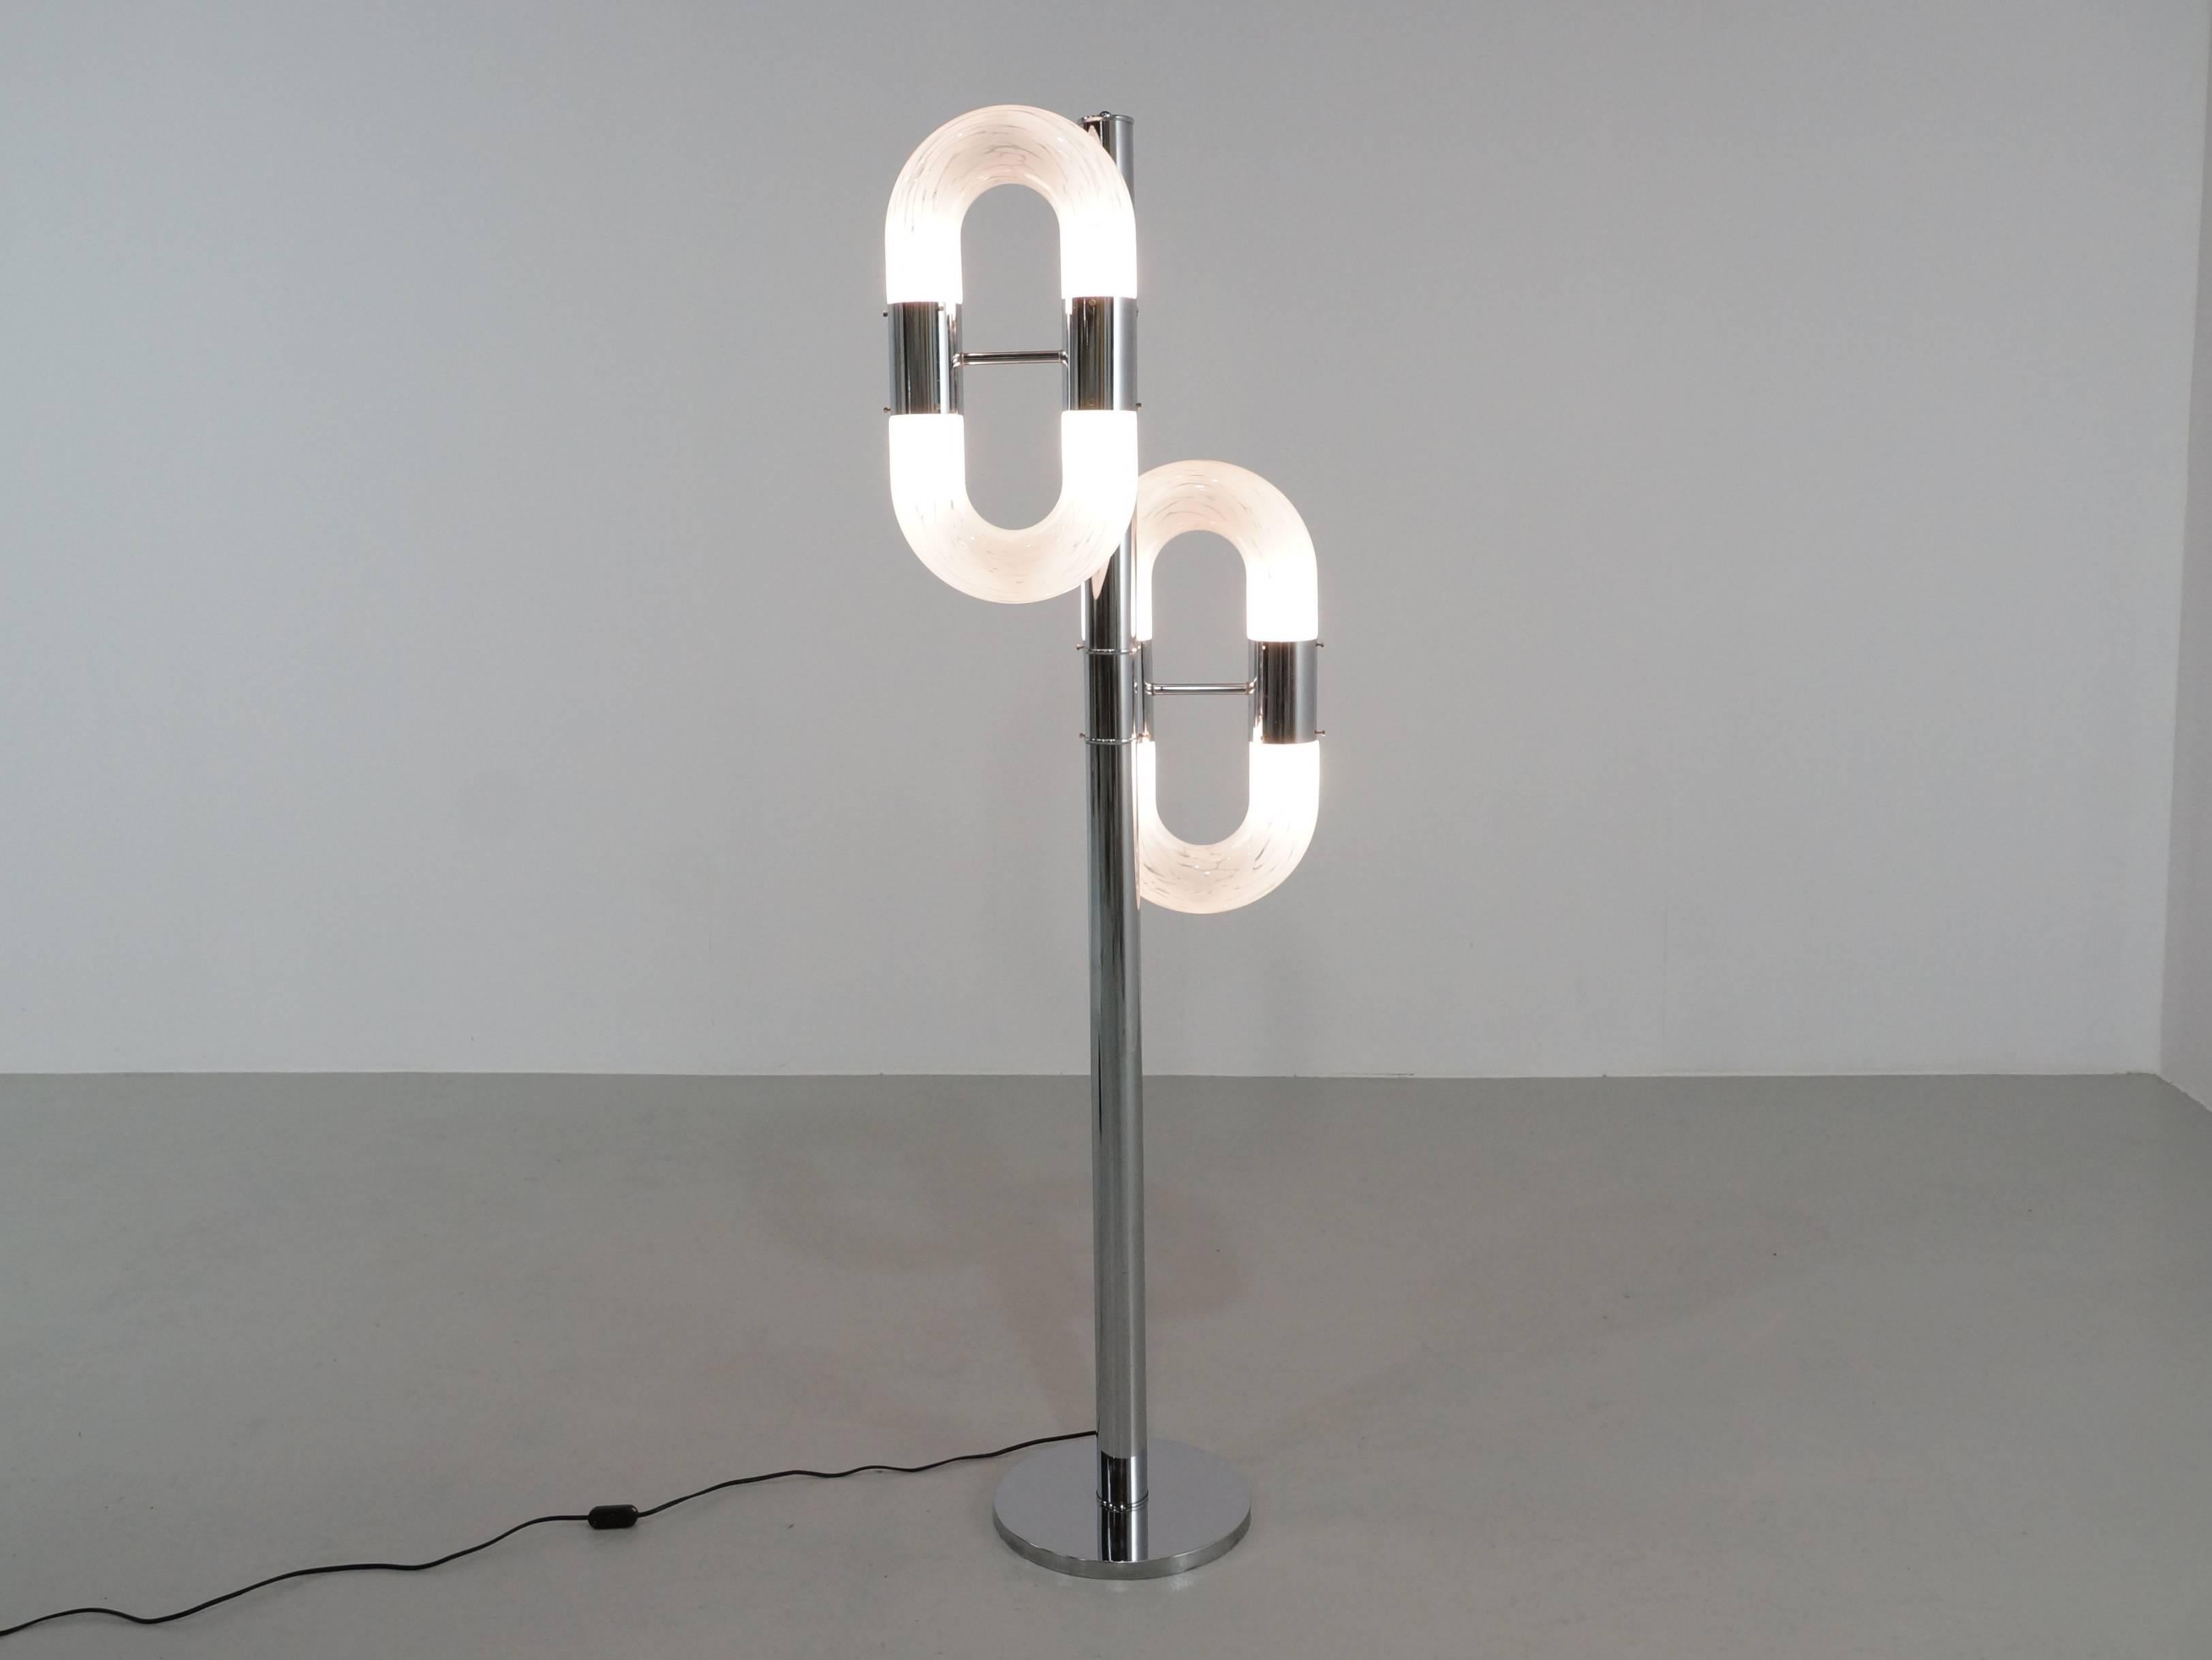 Beautiful floor lamp in chrome and glass by Carlo Nason for Mazzega.
This Italian floor lamp was designed in the 1970s, the base is made in chrome and the handmade glass bows in clear and white glass.
